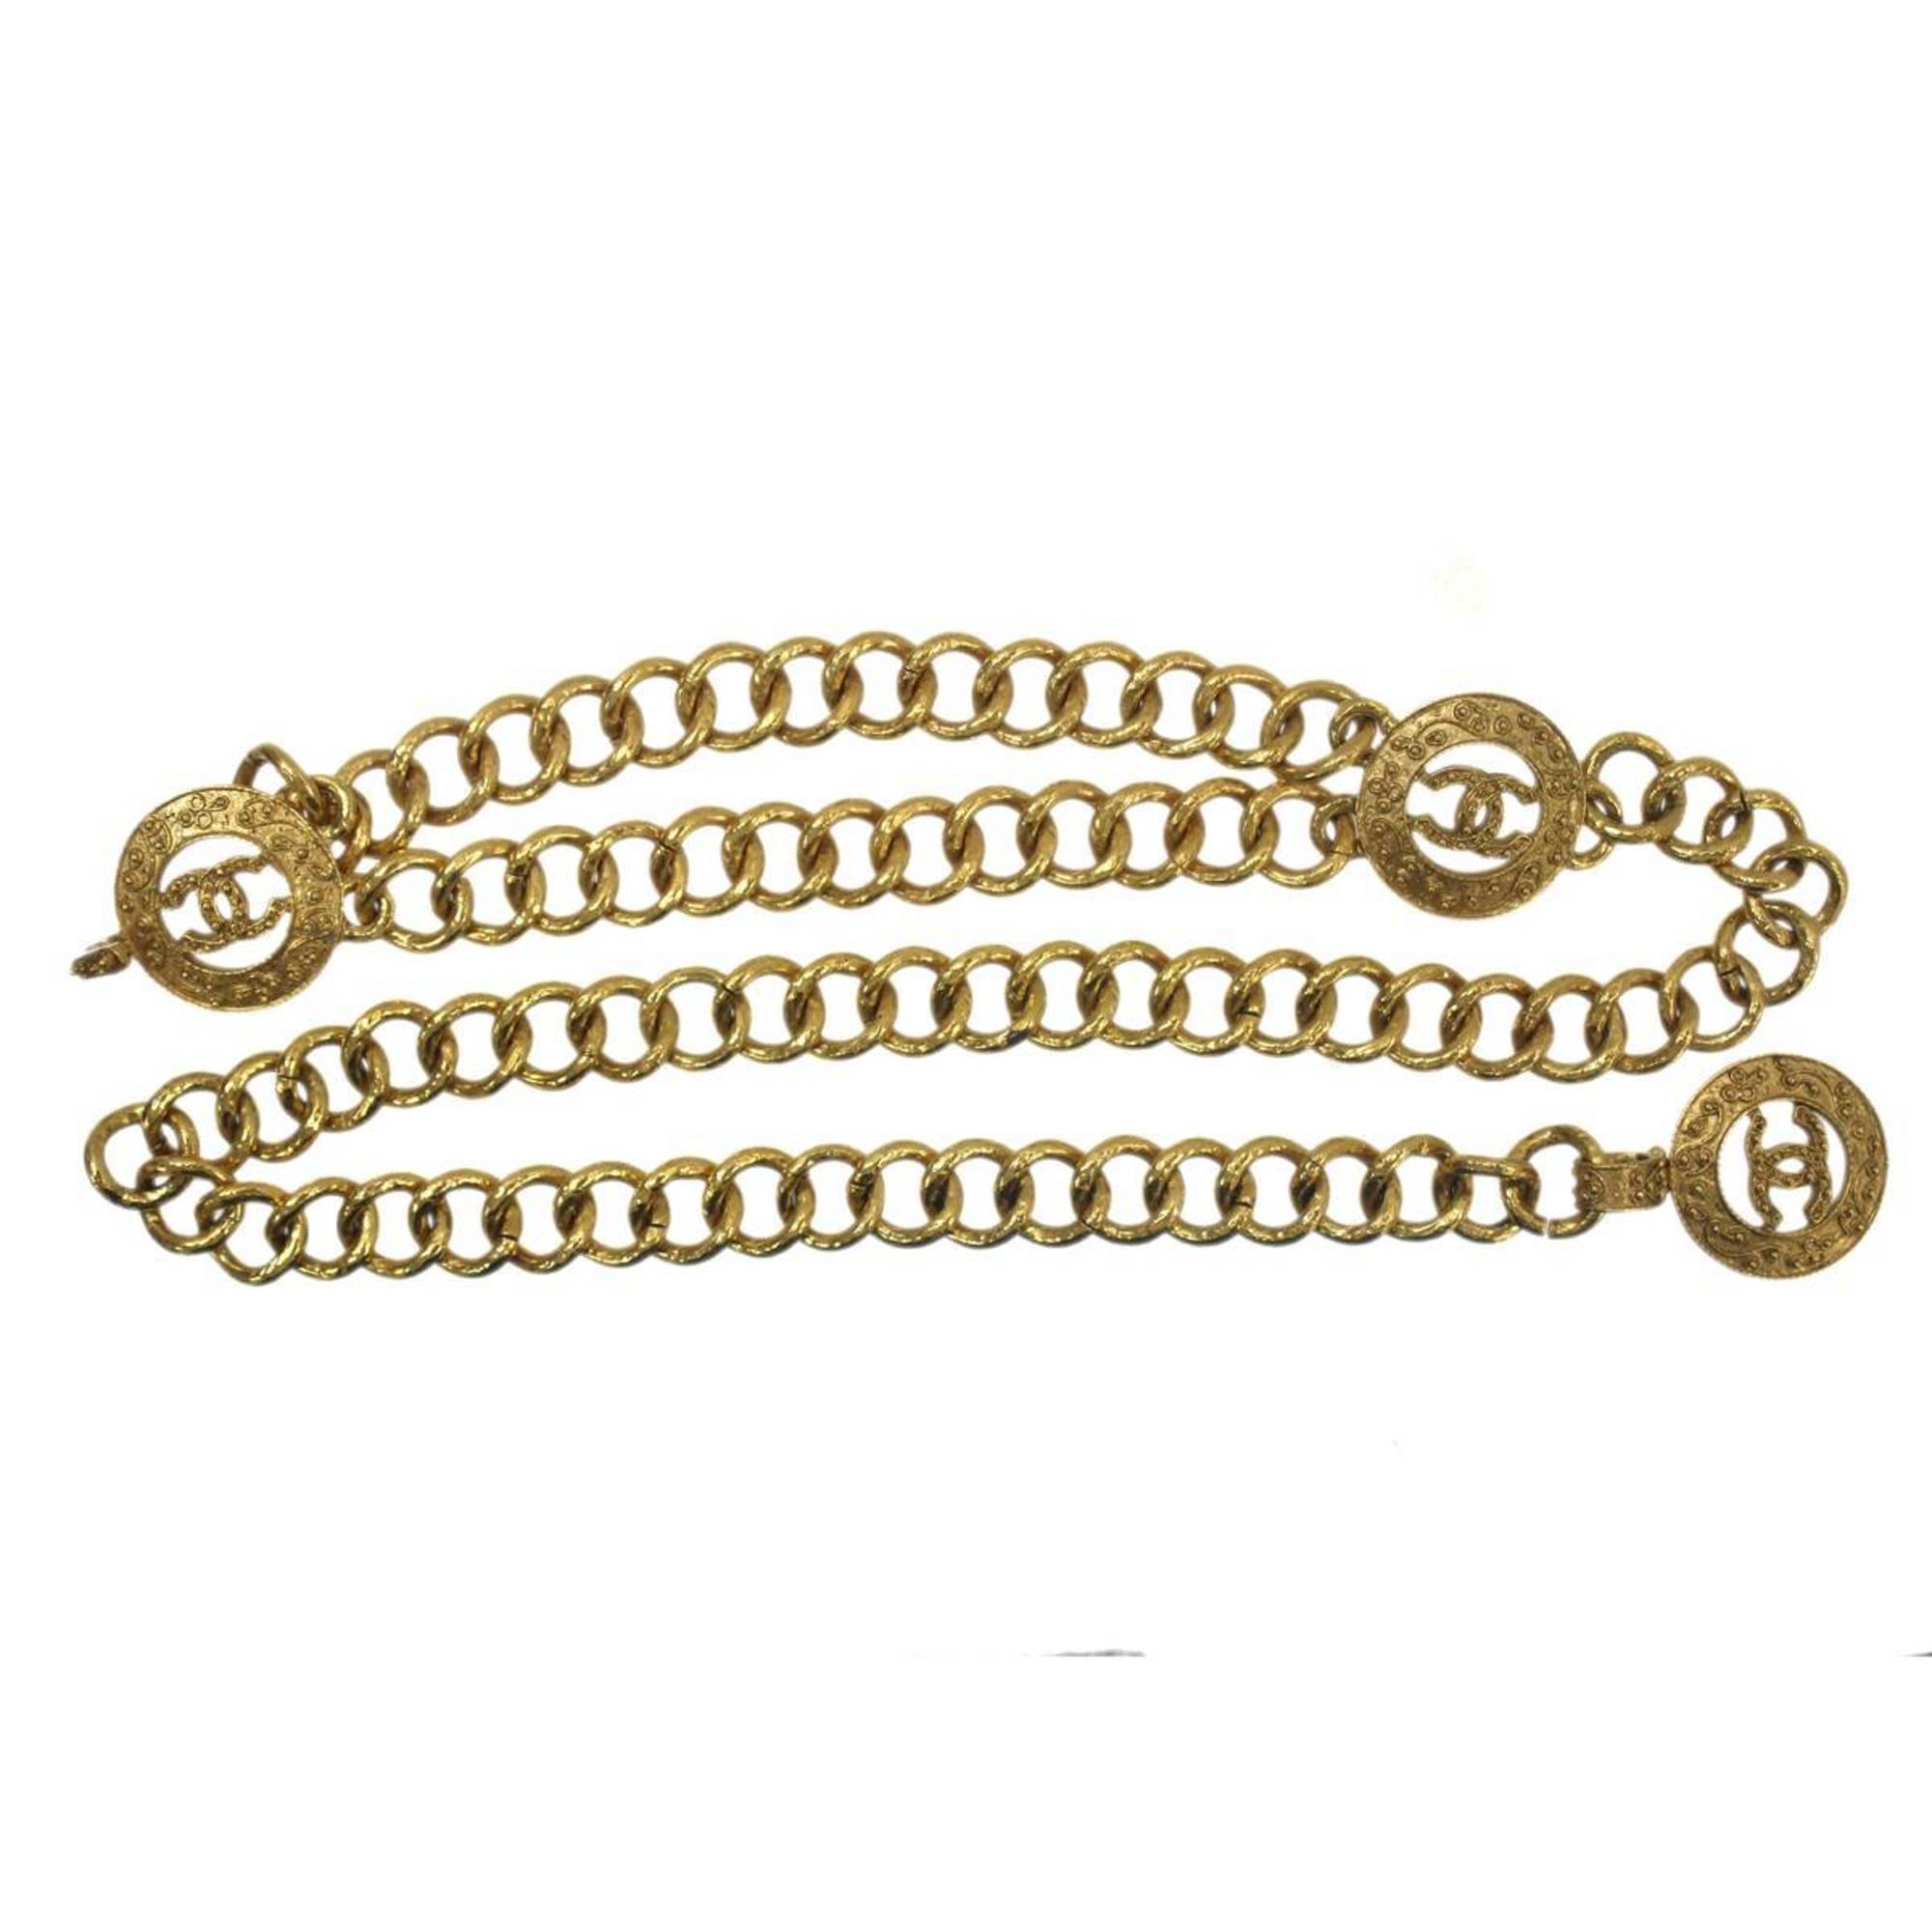 CHANEL Coco Mark Chain Belt Gold Plated Triple for Women